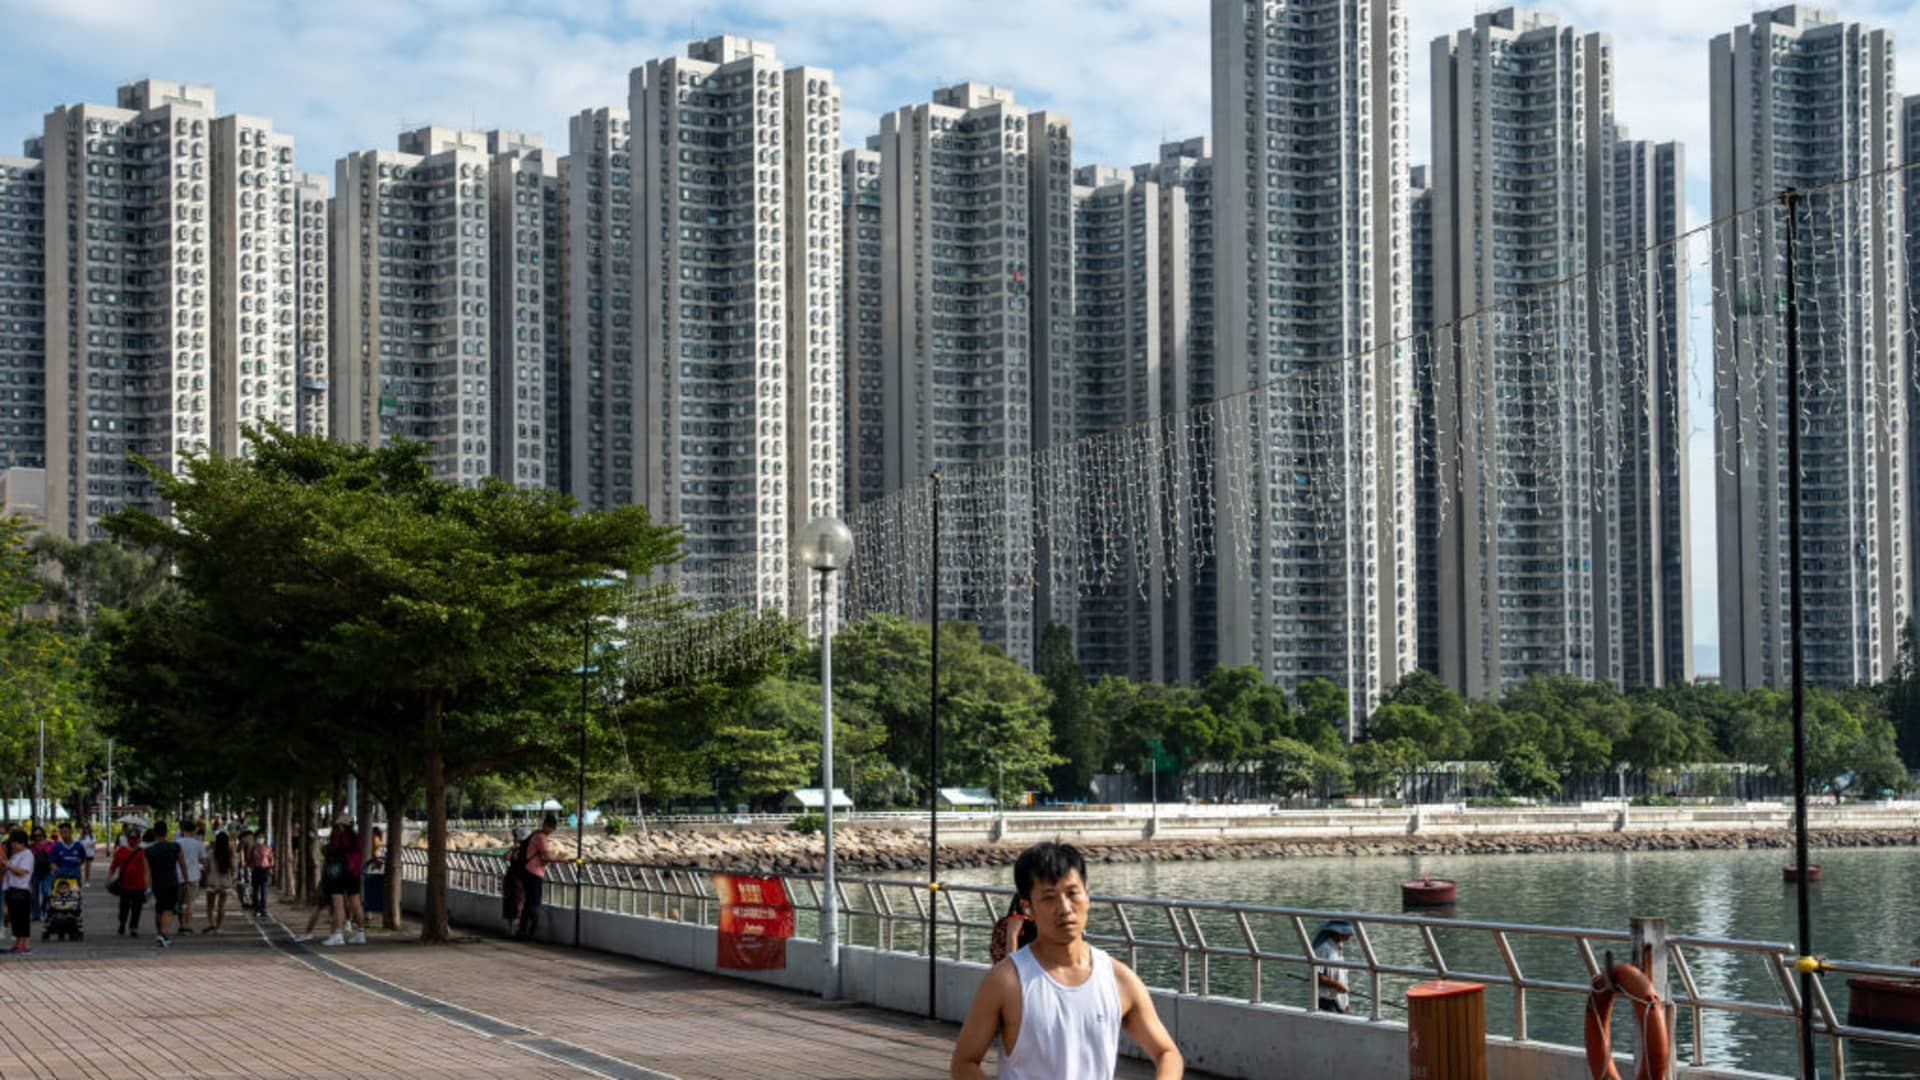 Hong Kong's property prices won't pop any time soon. Here's why